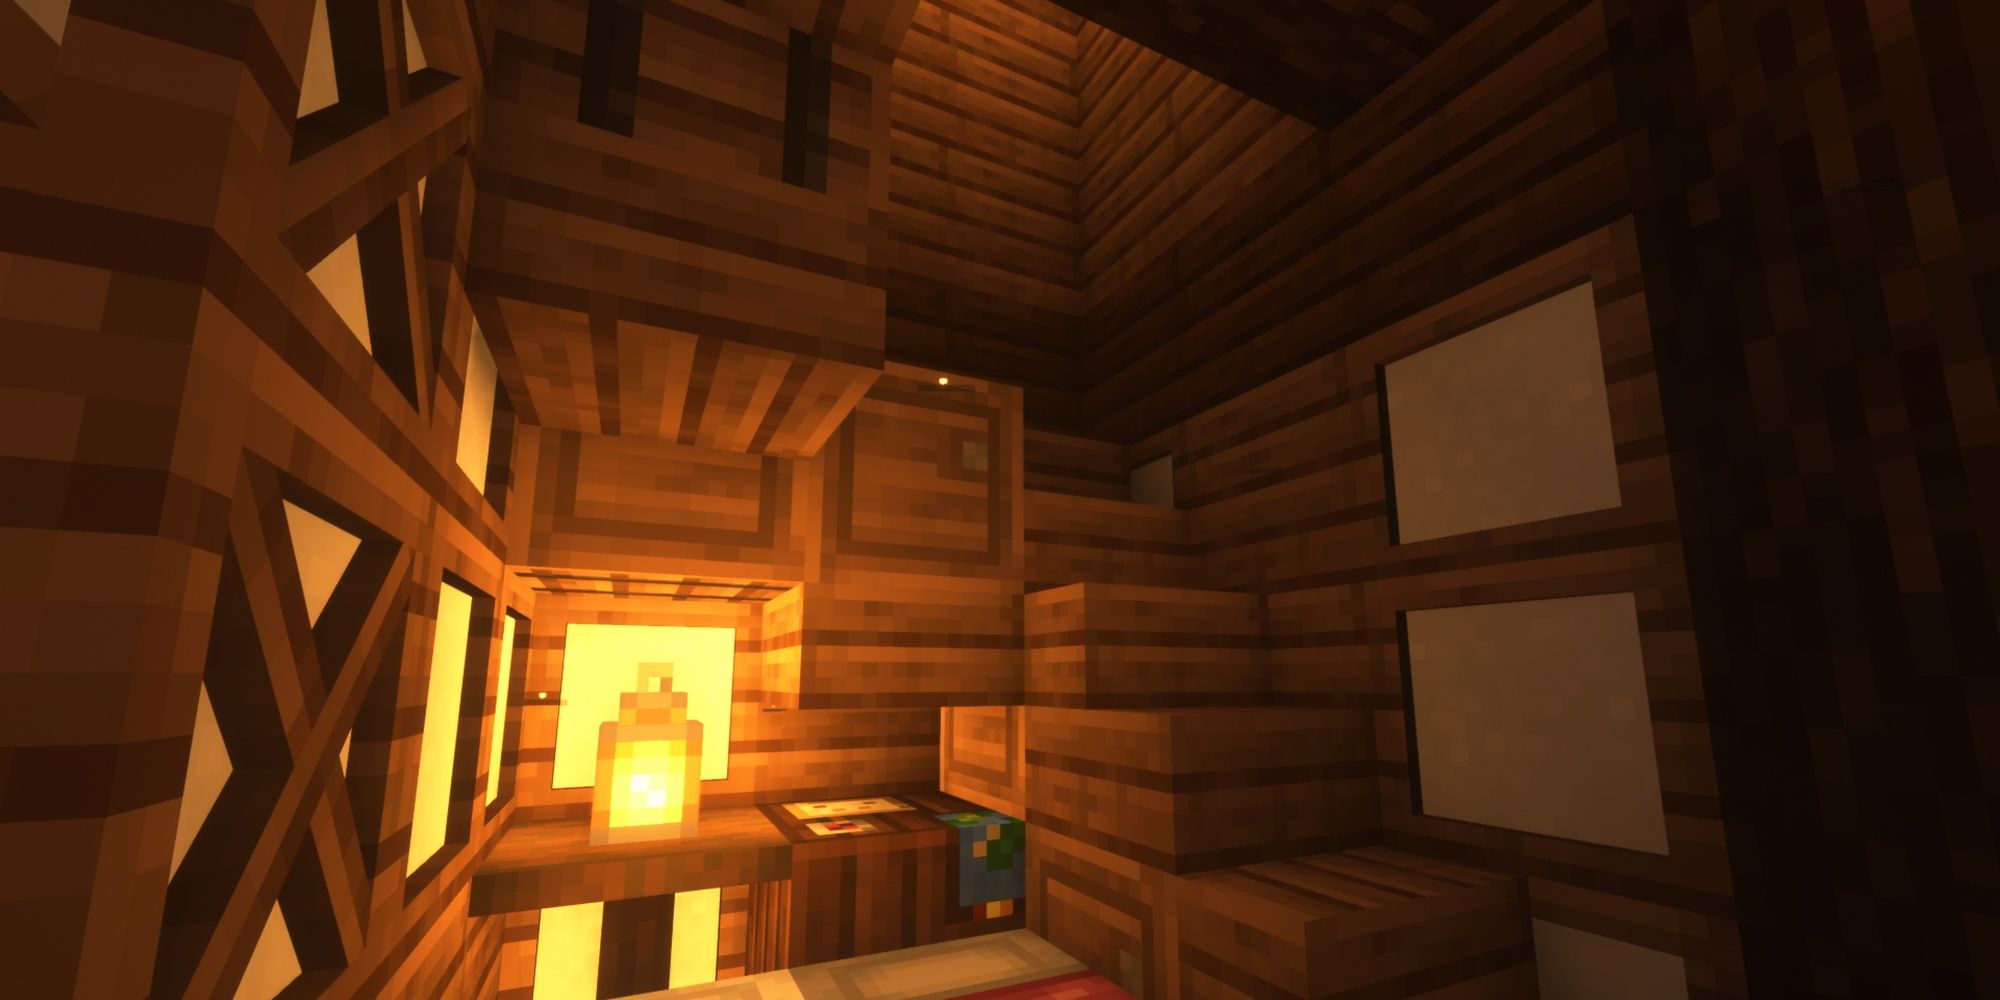 Minecraft staircase made out of spruce stairs and barrels.